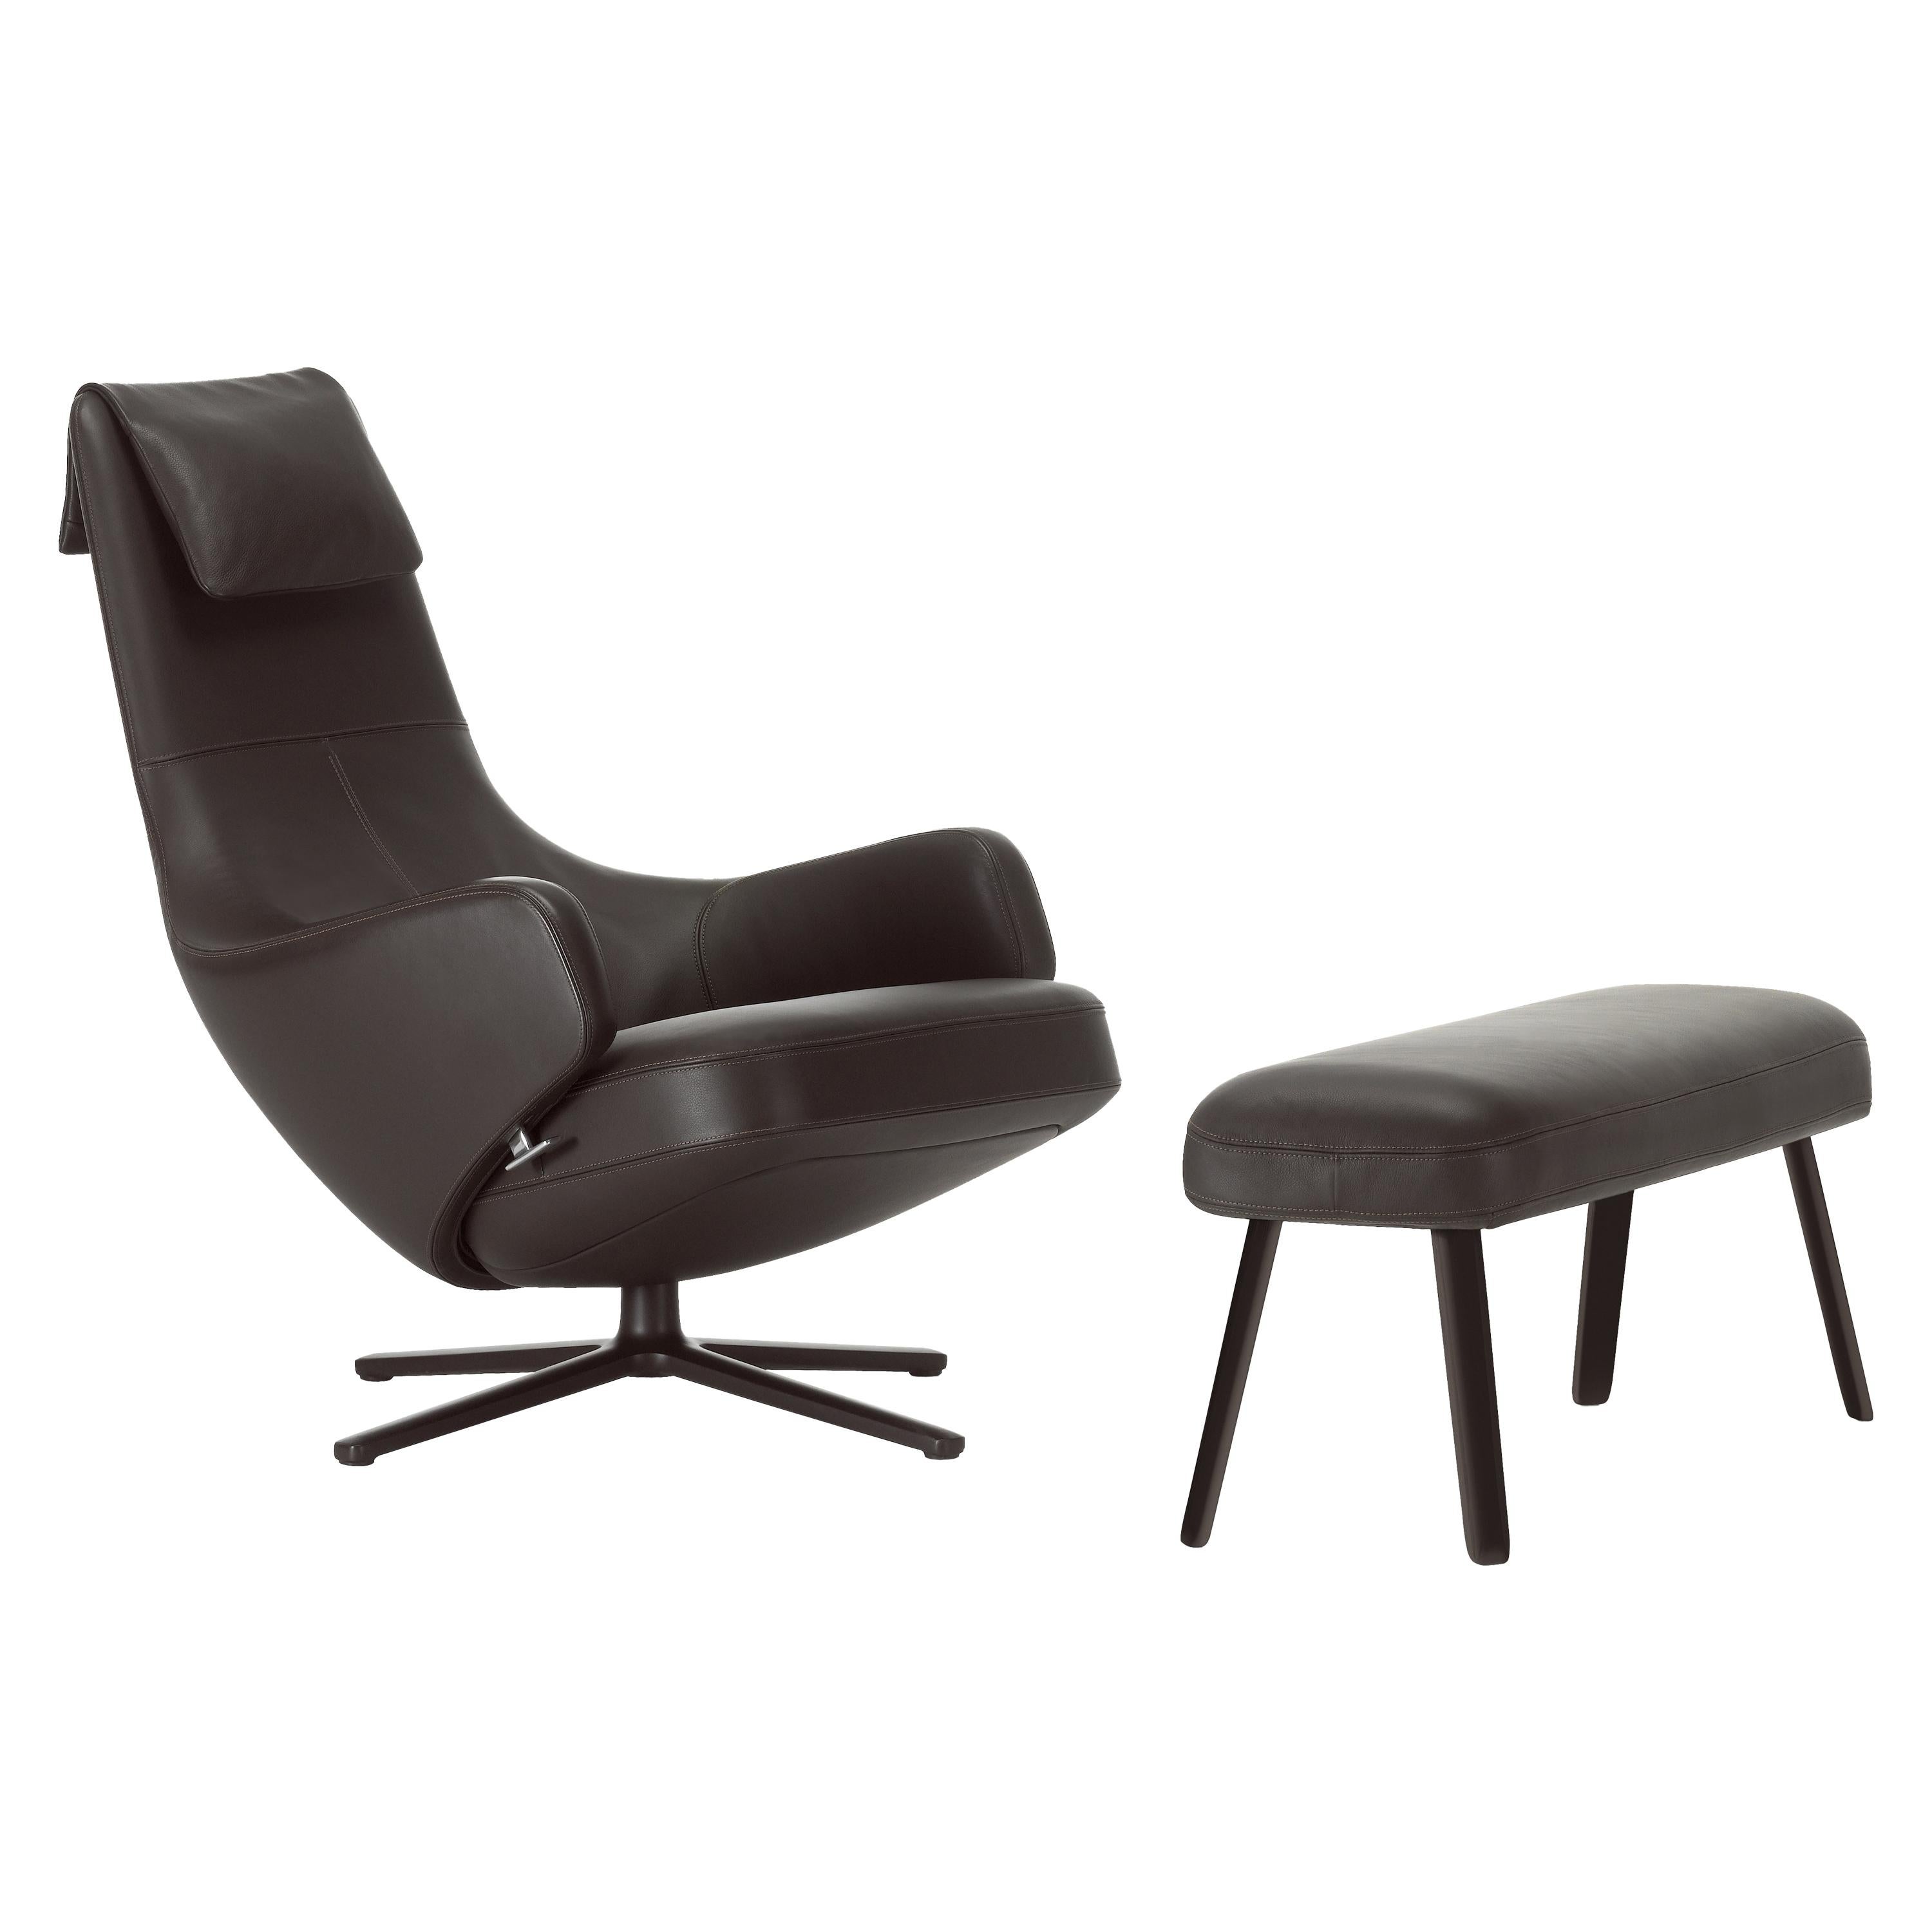 Vitra Repos & Large Panchina in Chocolate Leather by Antonio Citterio For Sale